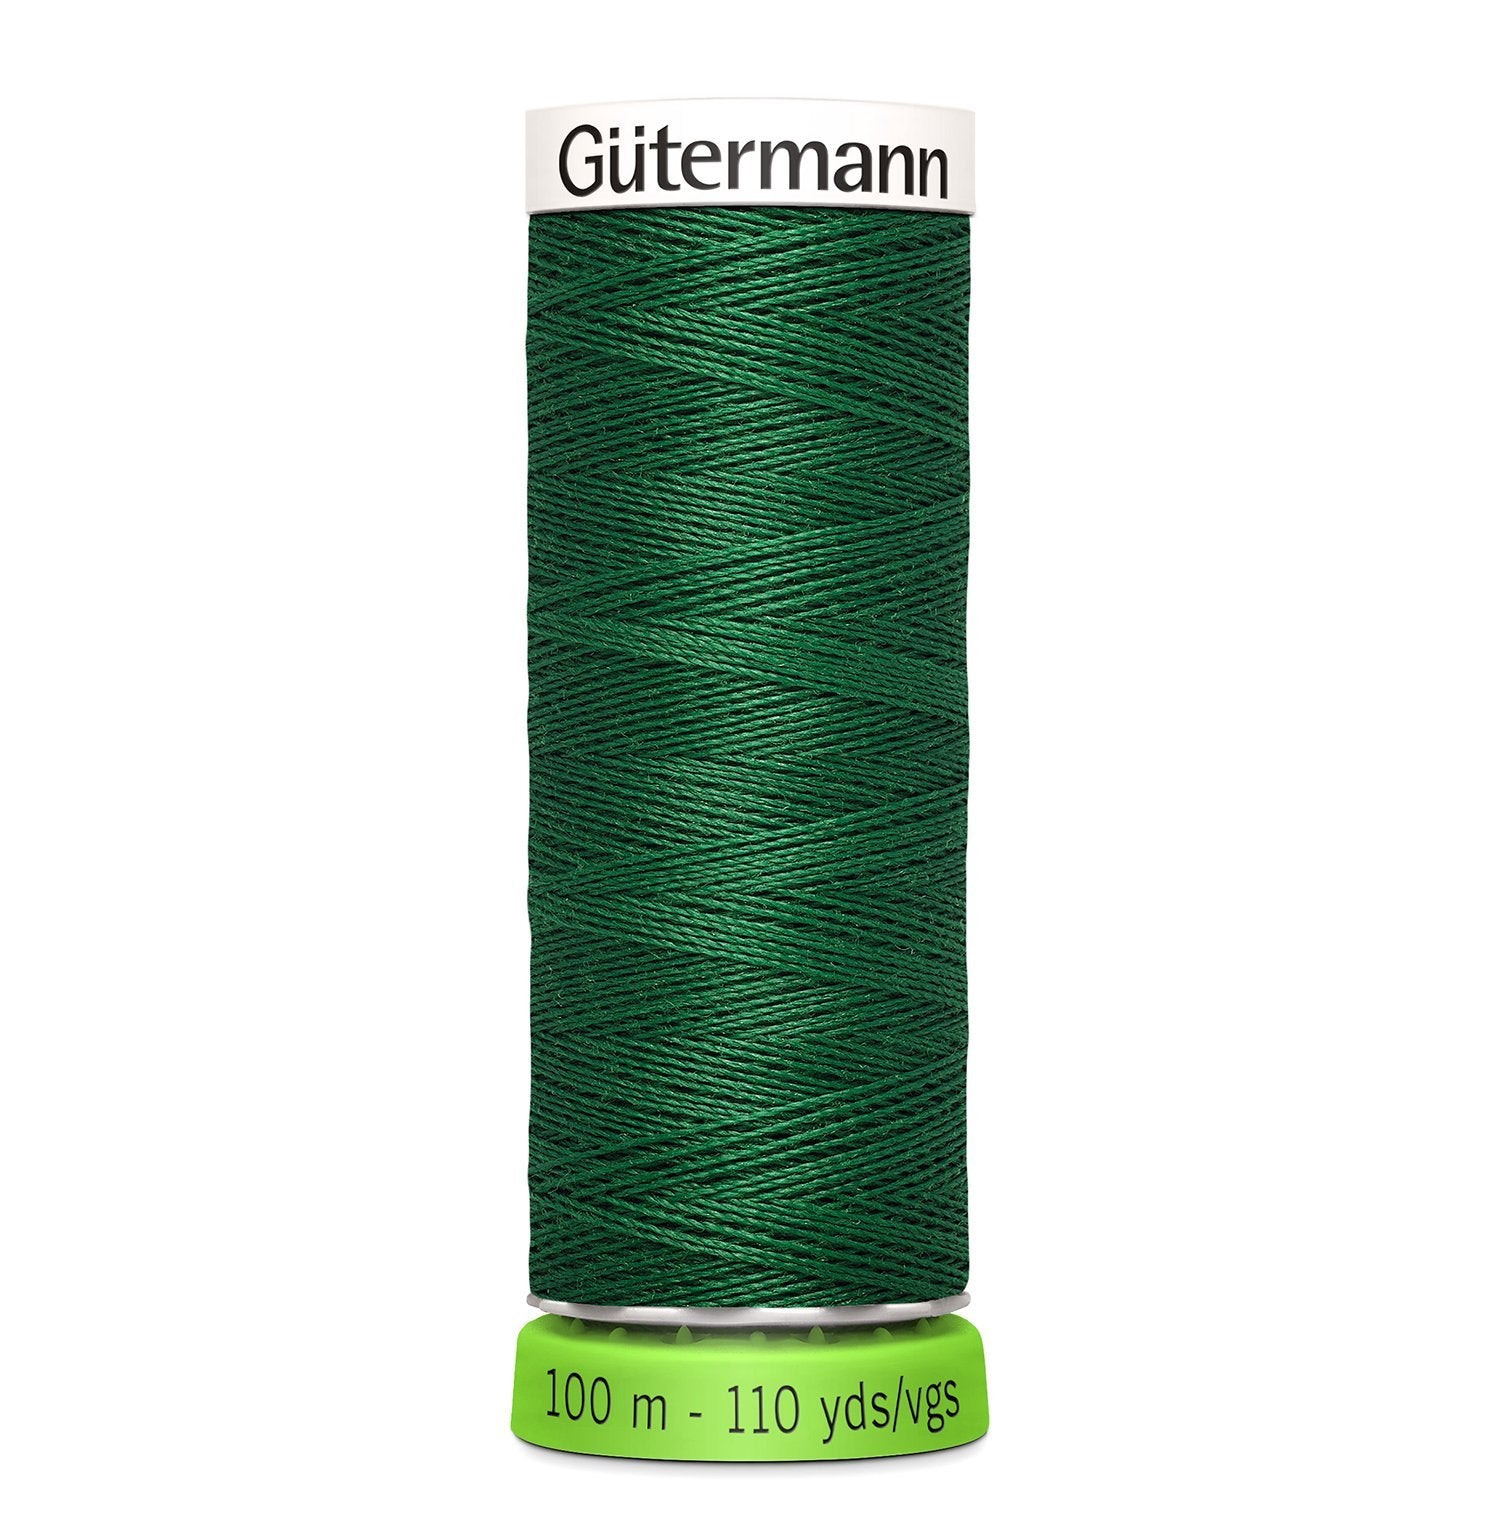 Gutermann Recycled Thread 100m, Colour 237 from Jaycotts Sewing Supplies